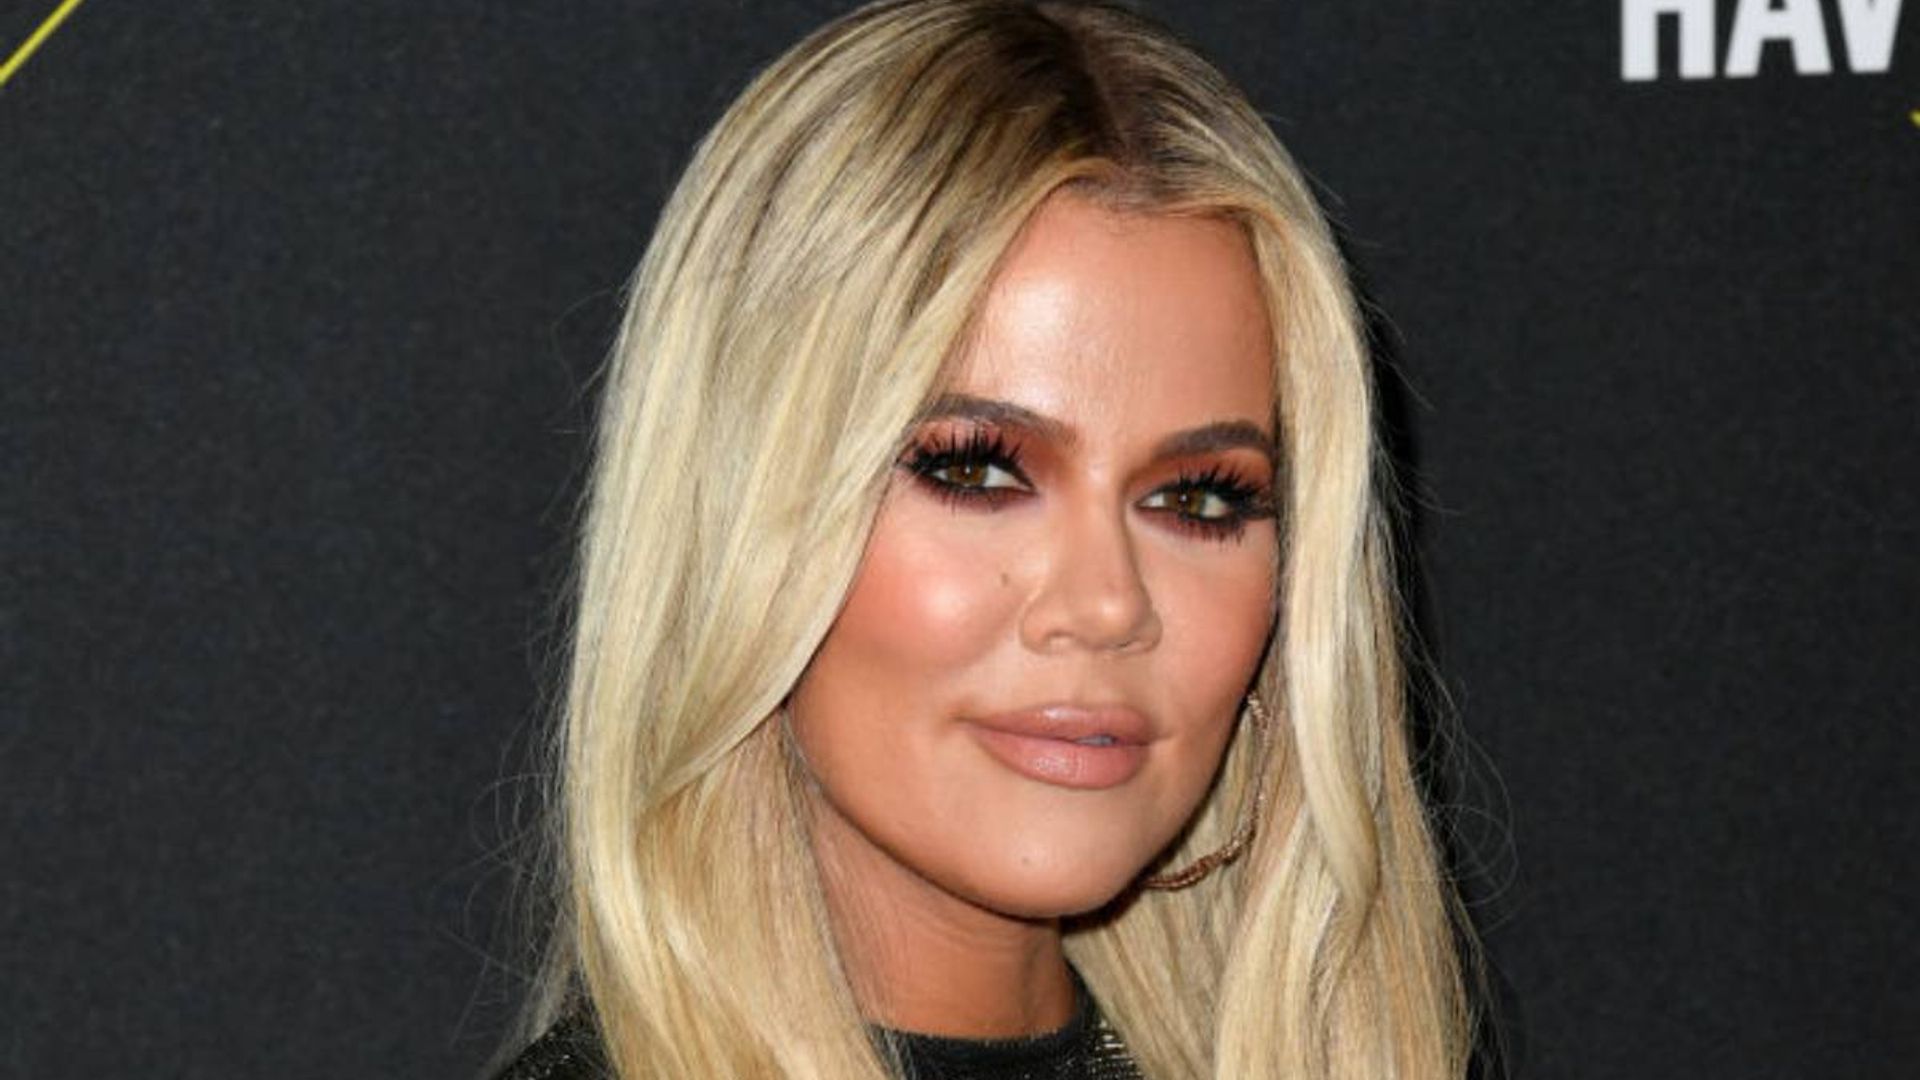 Khloe Kardashian reveals all-natural hair and she looks so different